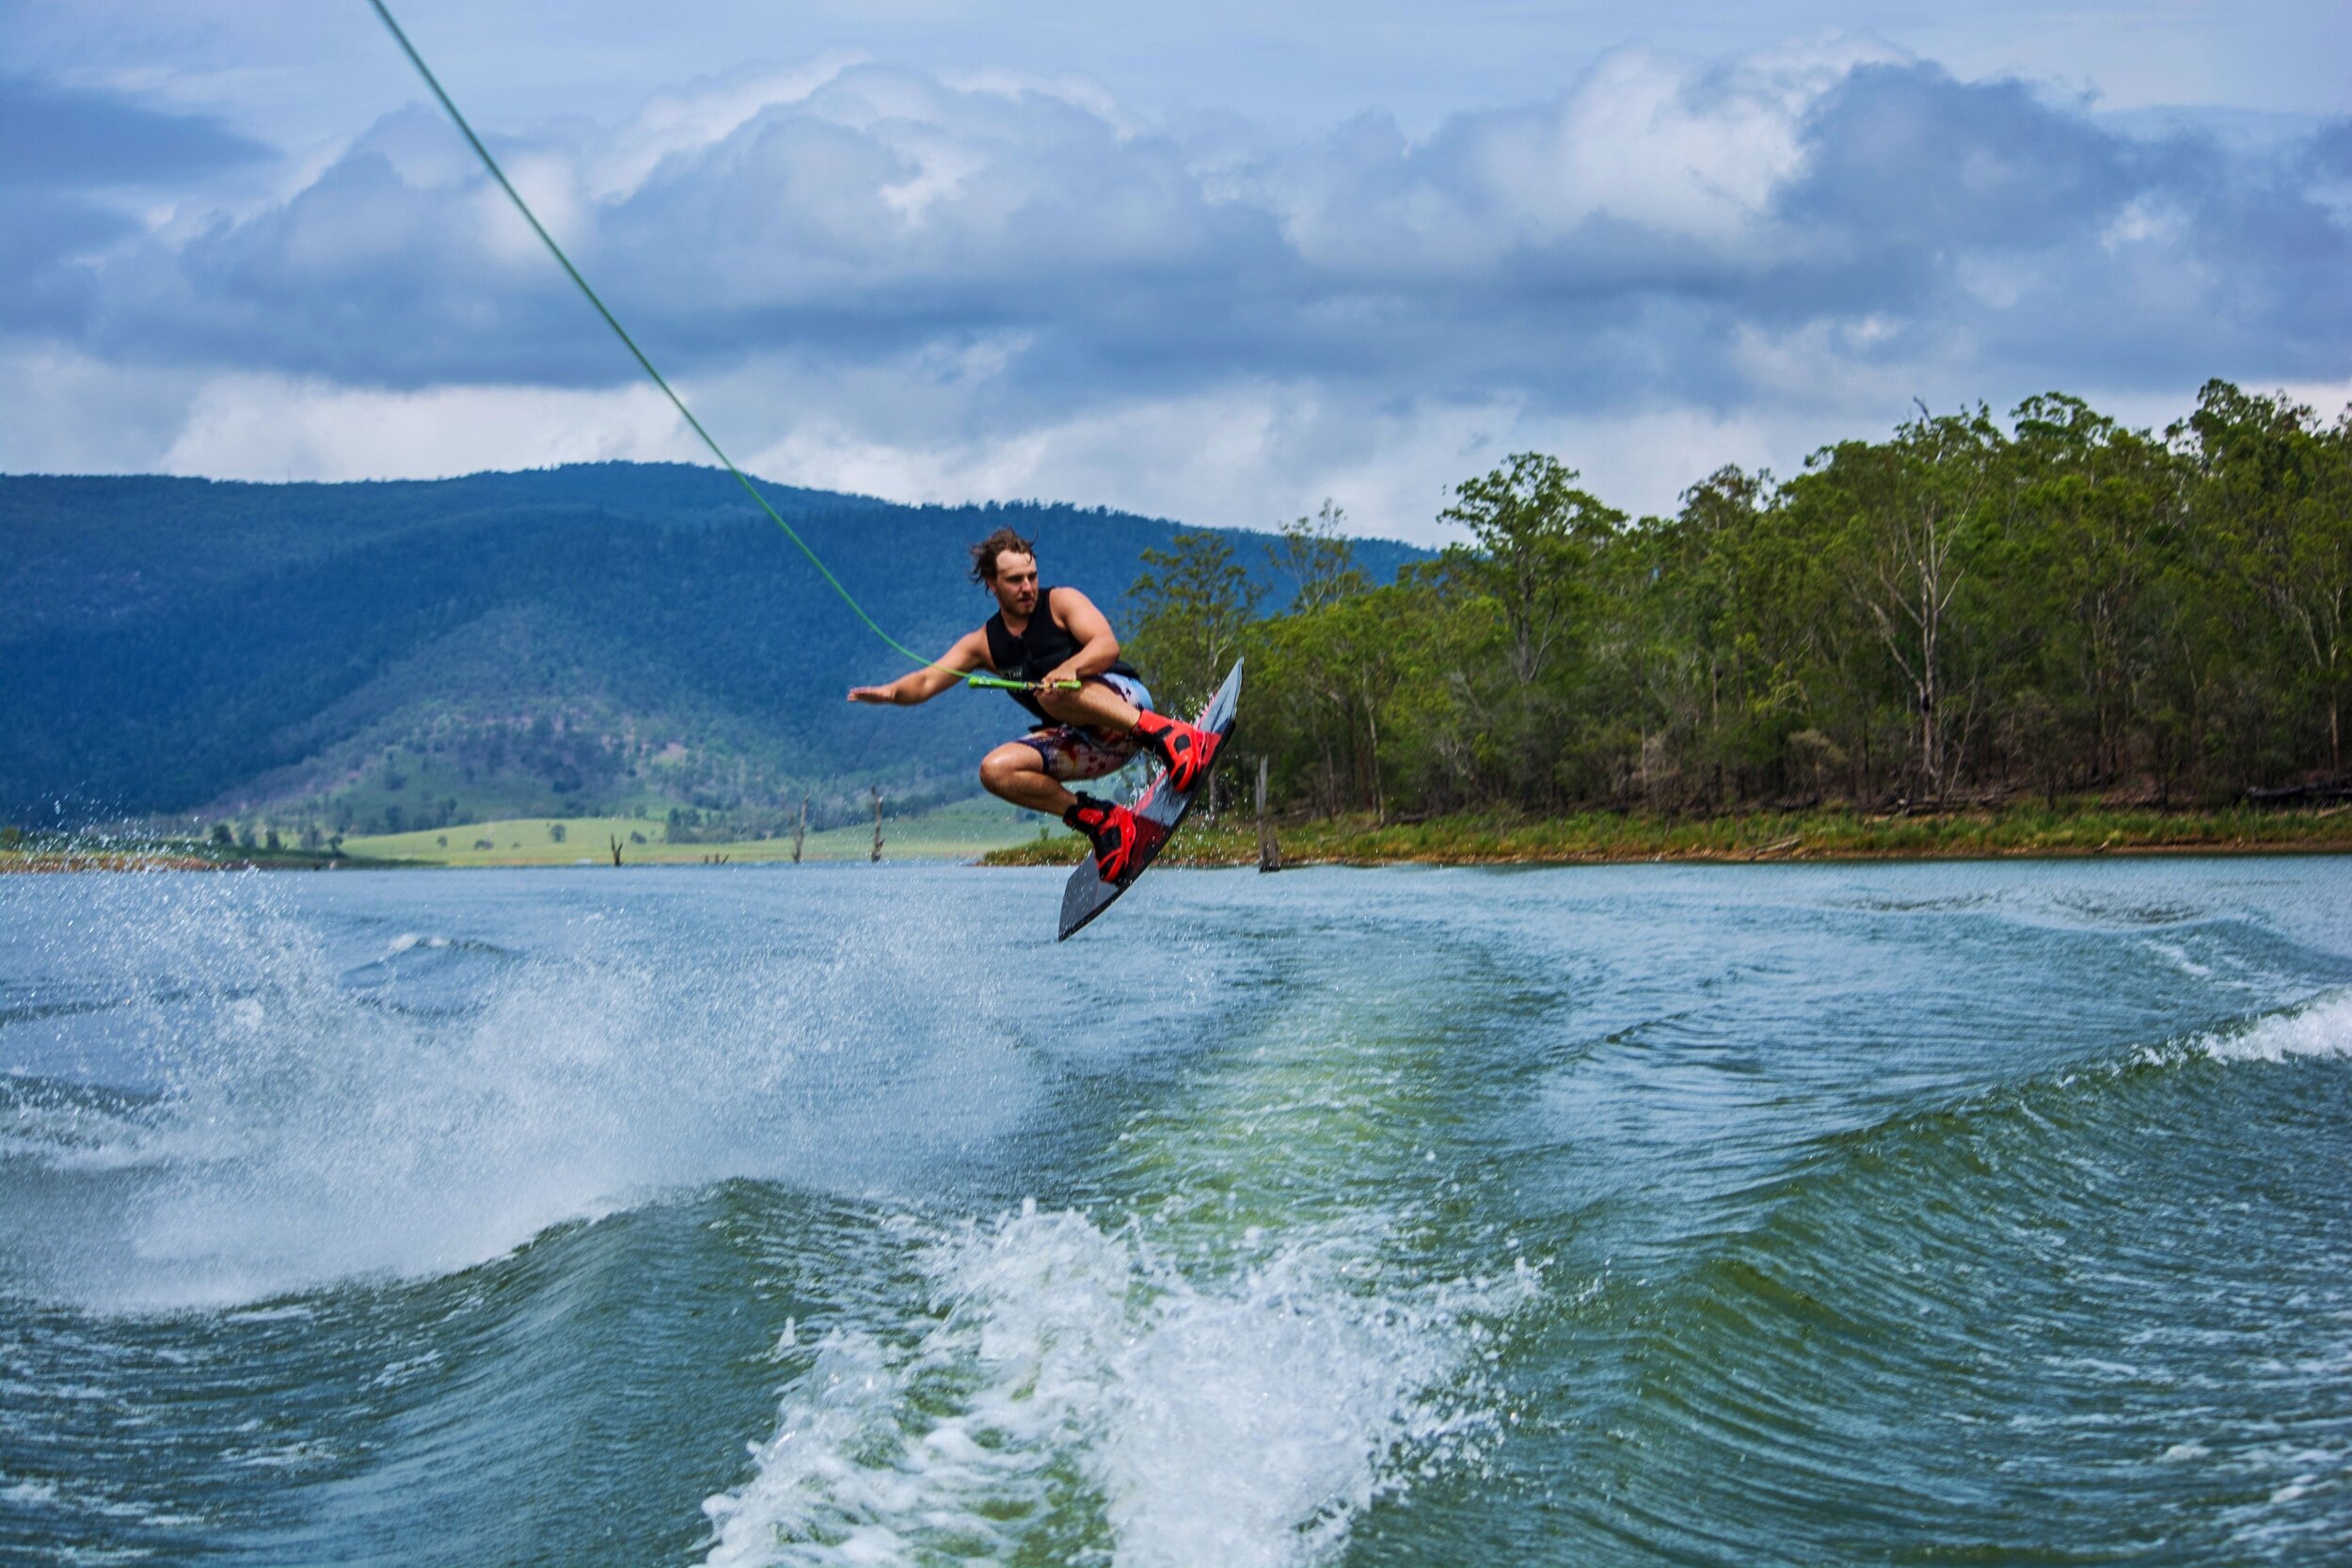 Wakeboarding: Jumping the wake - one of the favorite ocean lovers' trick. 2500x1670 HD Wallpaper.